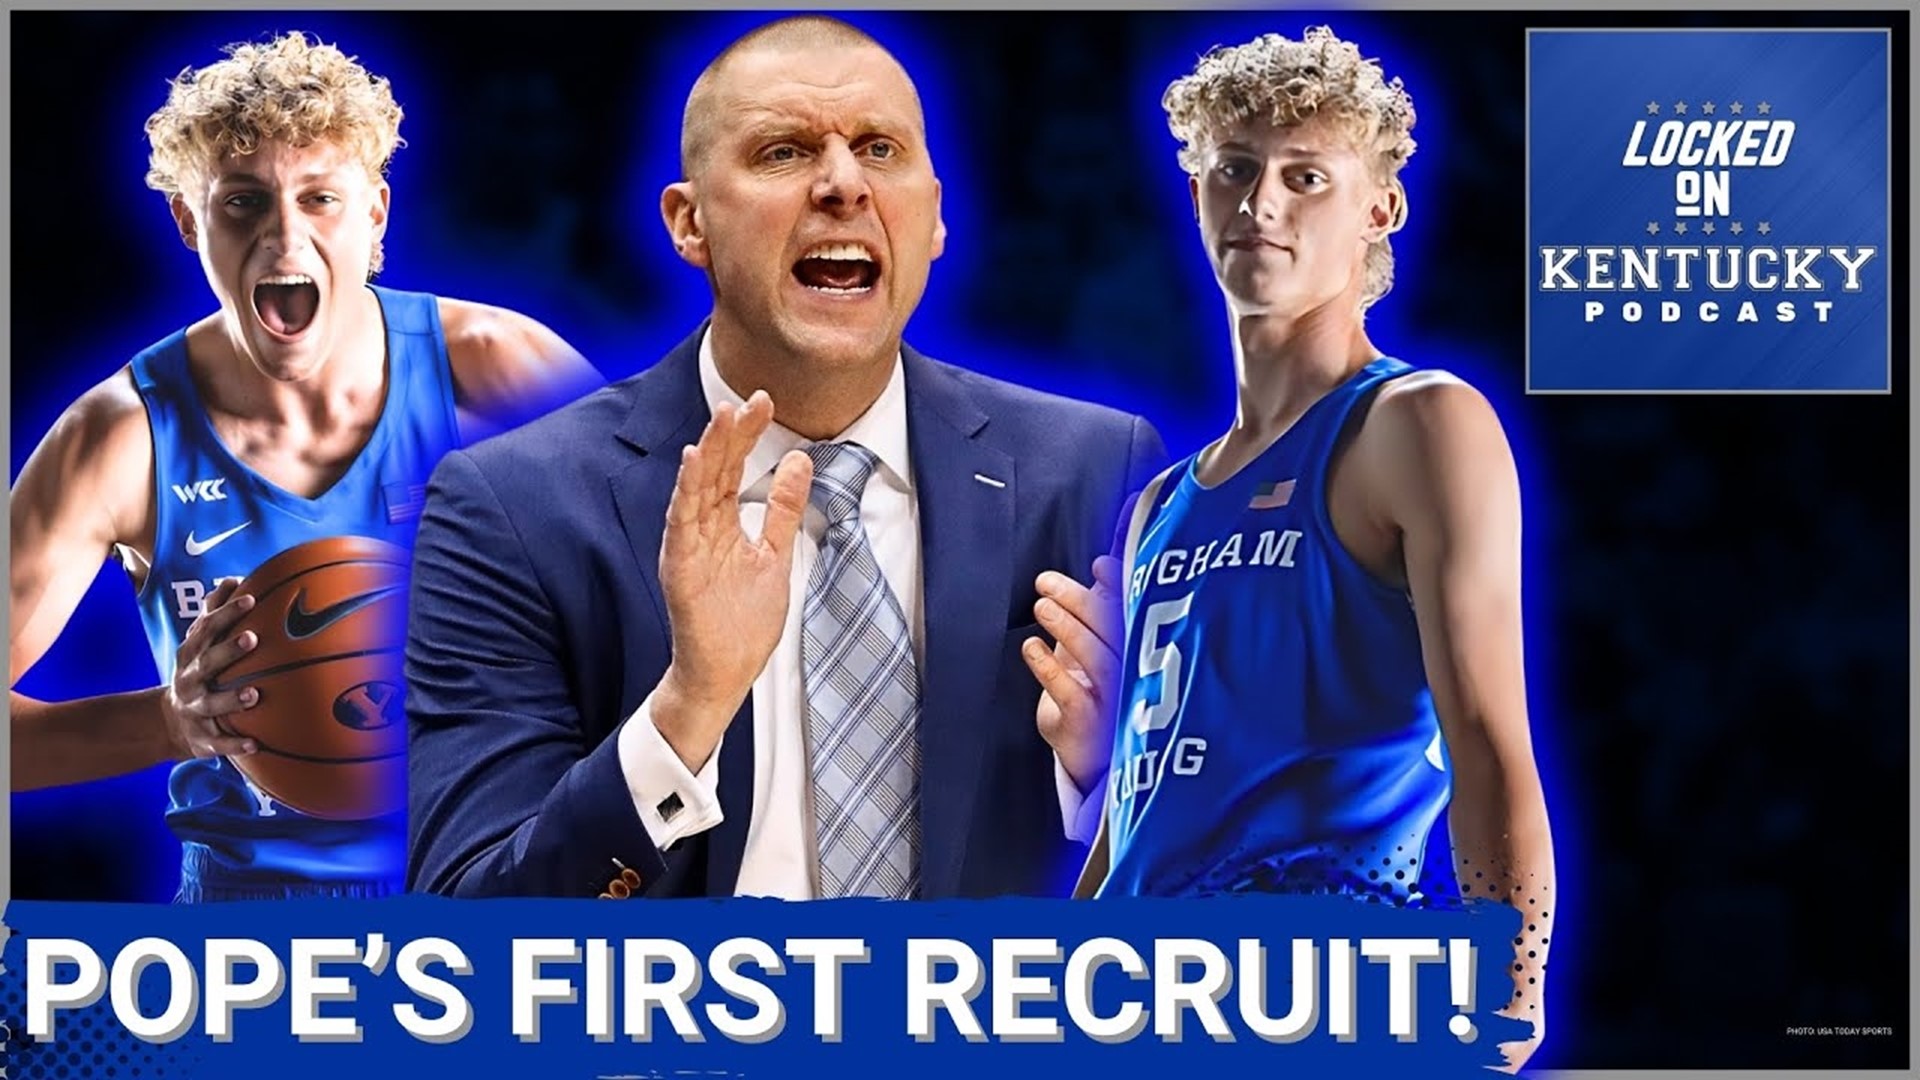 Kentucky basketball and Mark Pope just landed a high-profile recruit in Collin Chandler.